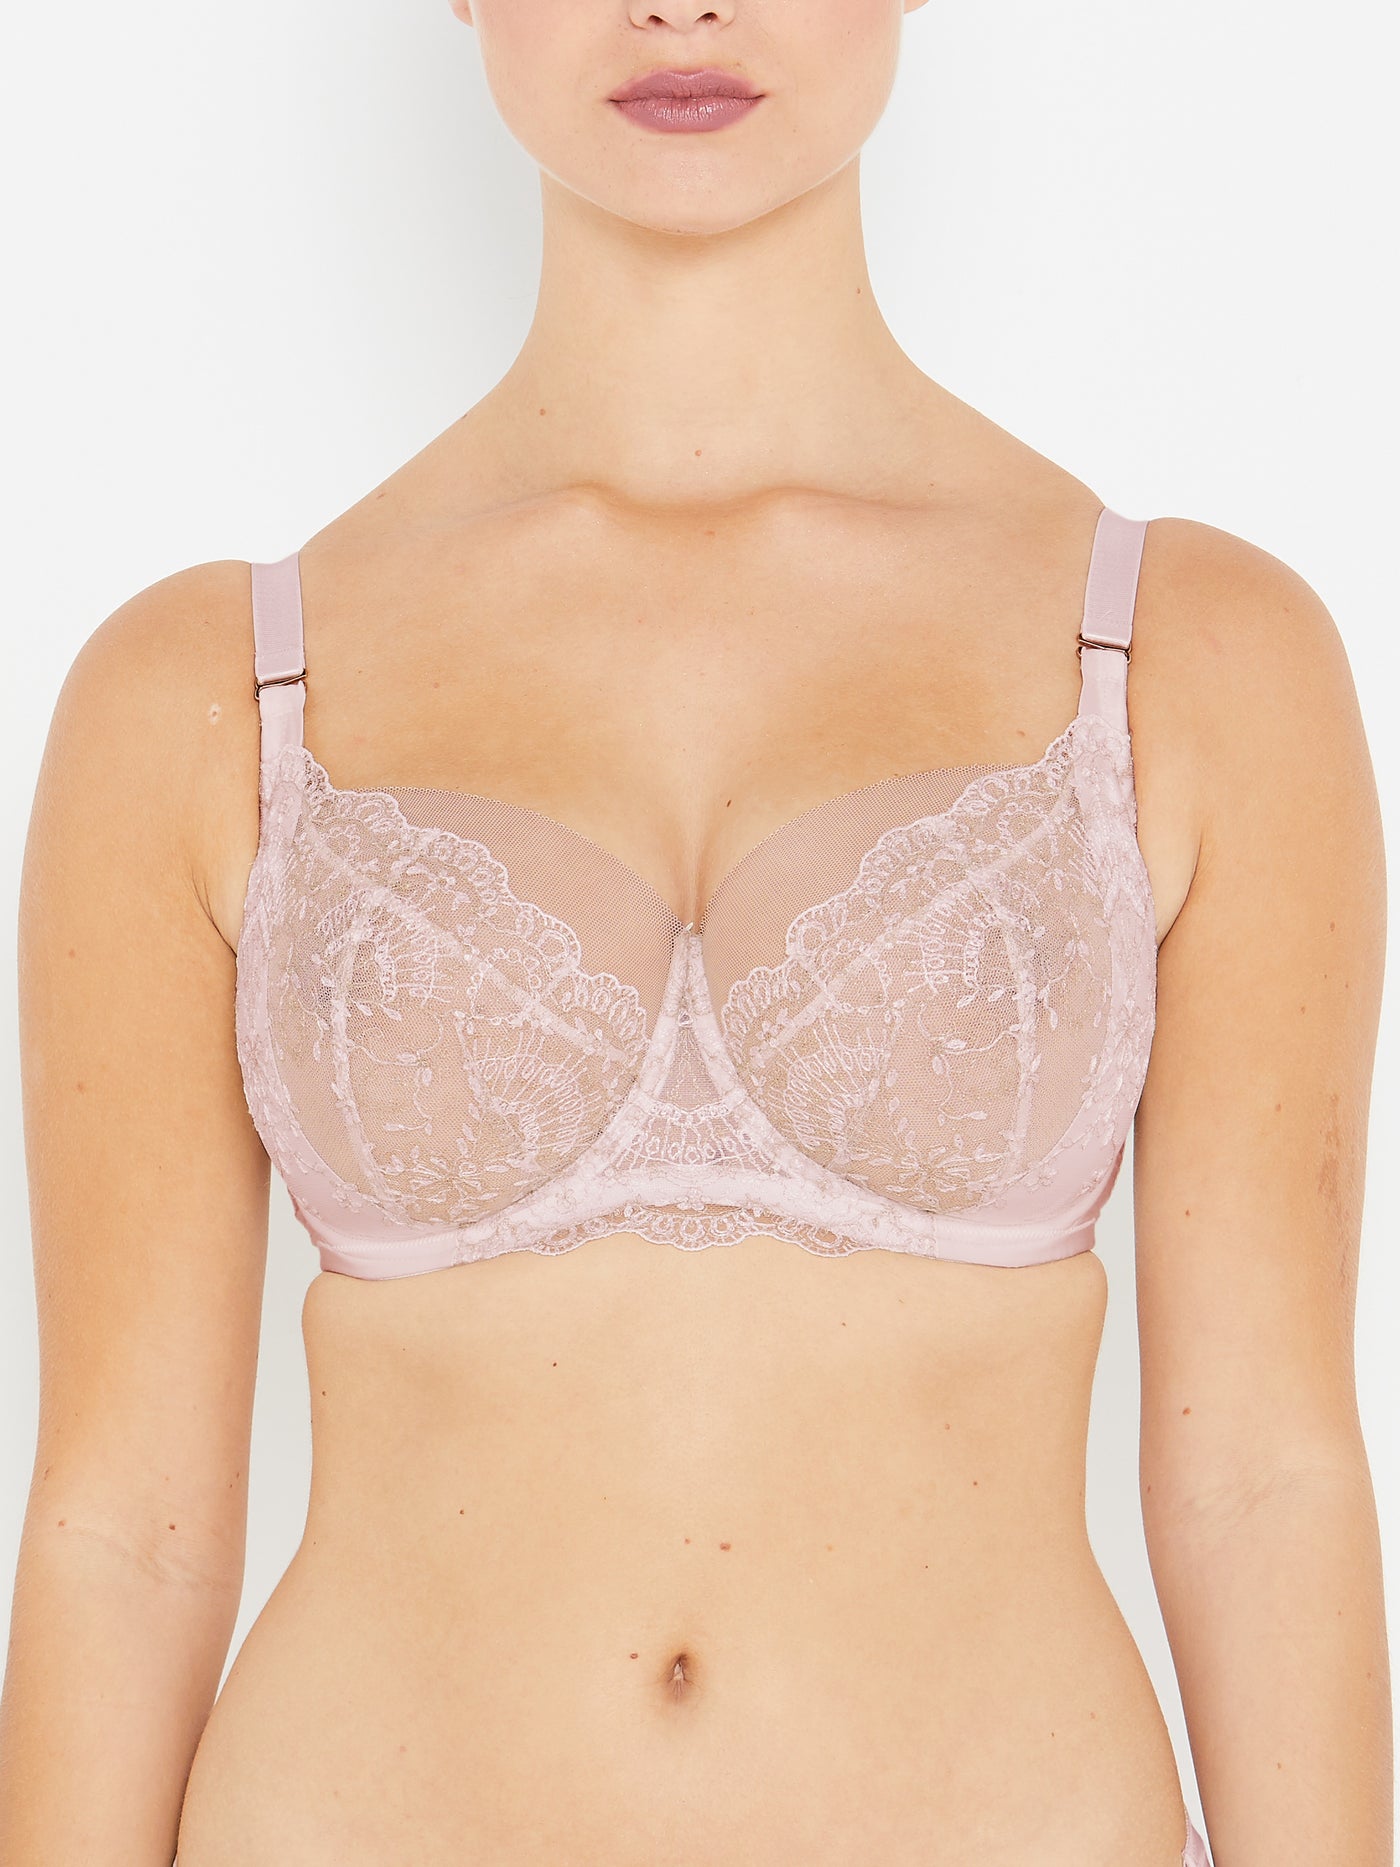 Grace vintage rose full cup bra front view